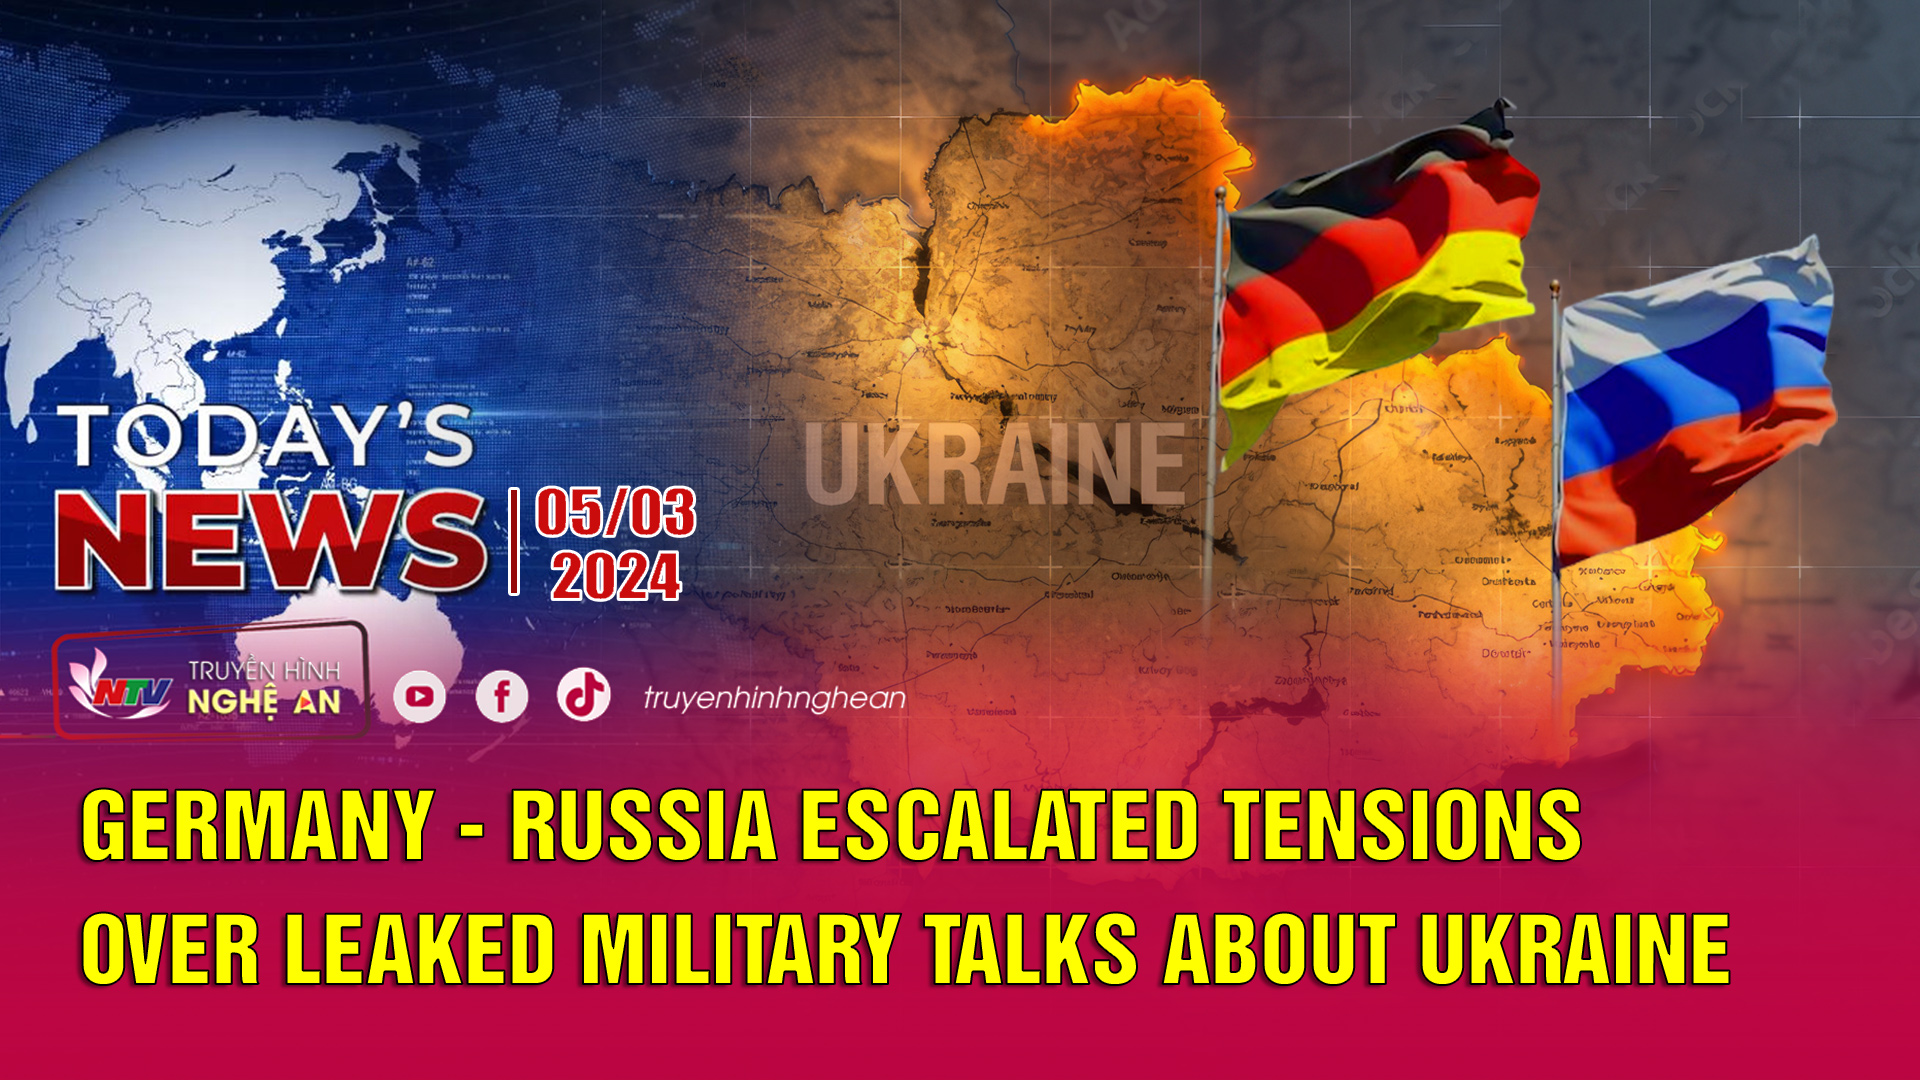 Today's News 05/3/2024: Germany - Russia escalated tensions over leaked Military Talks about Ukraine